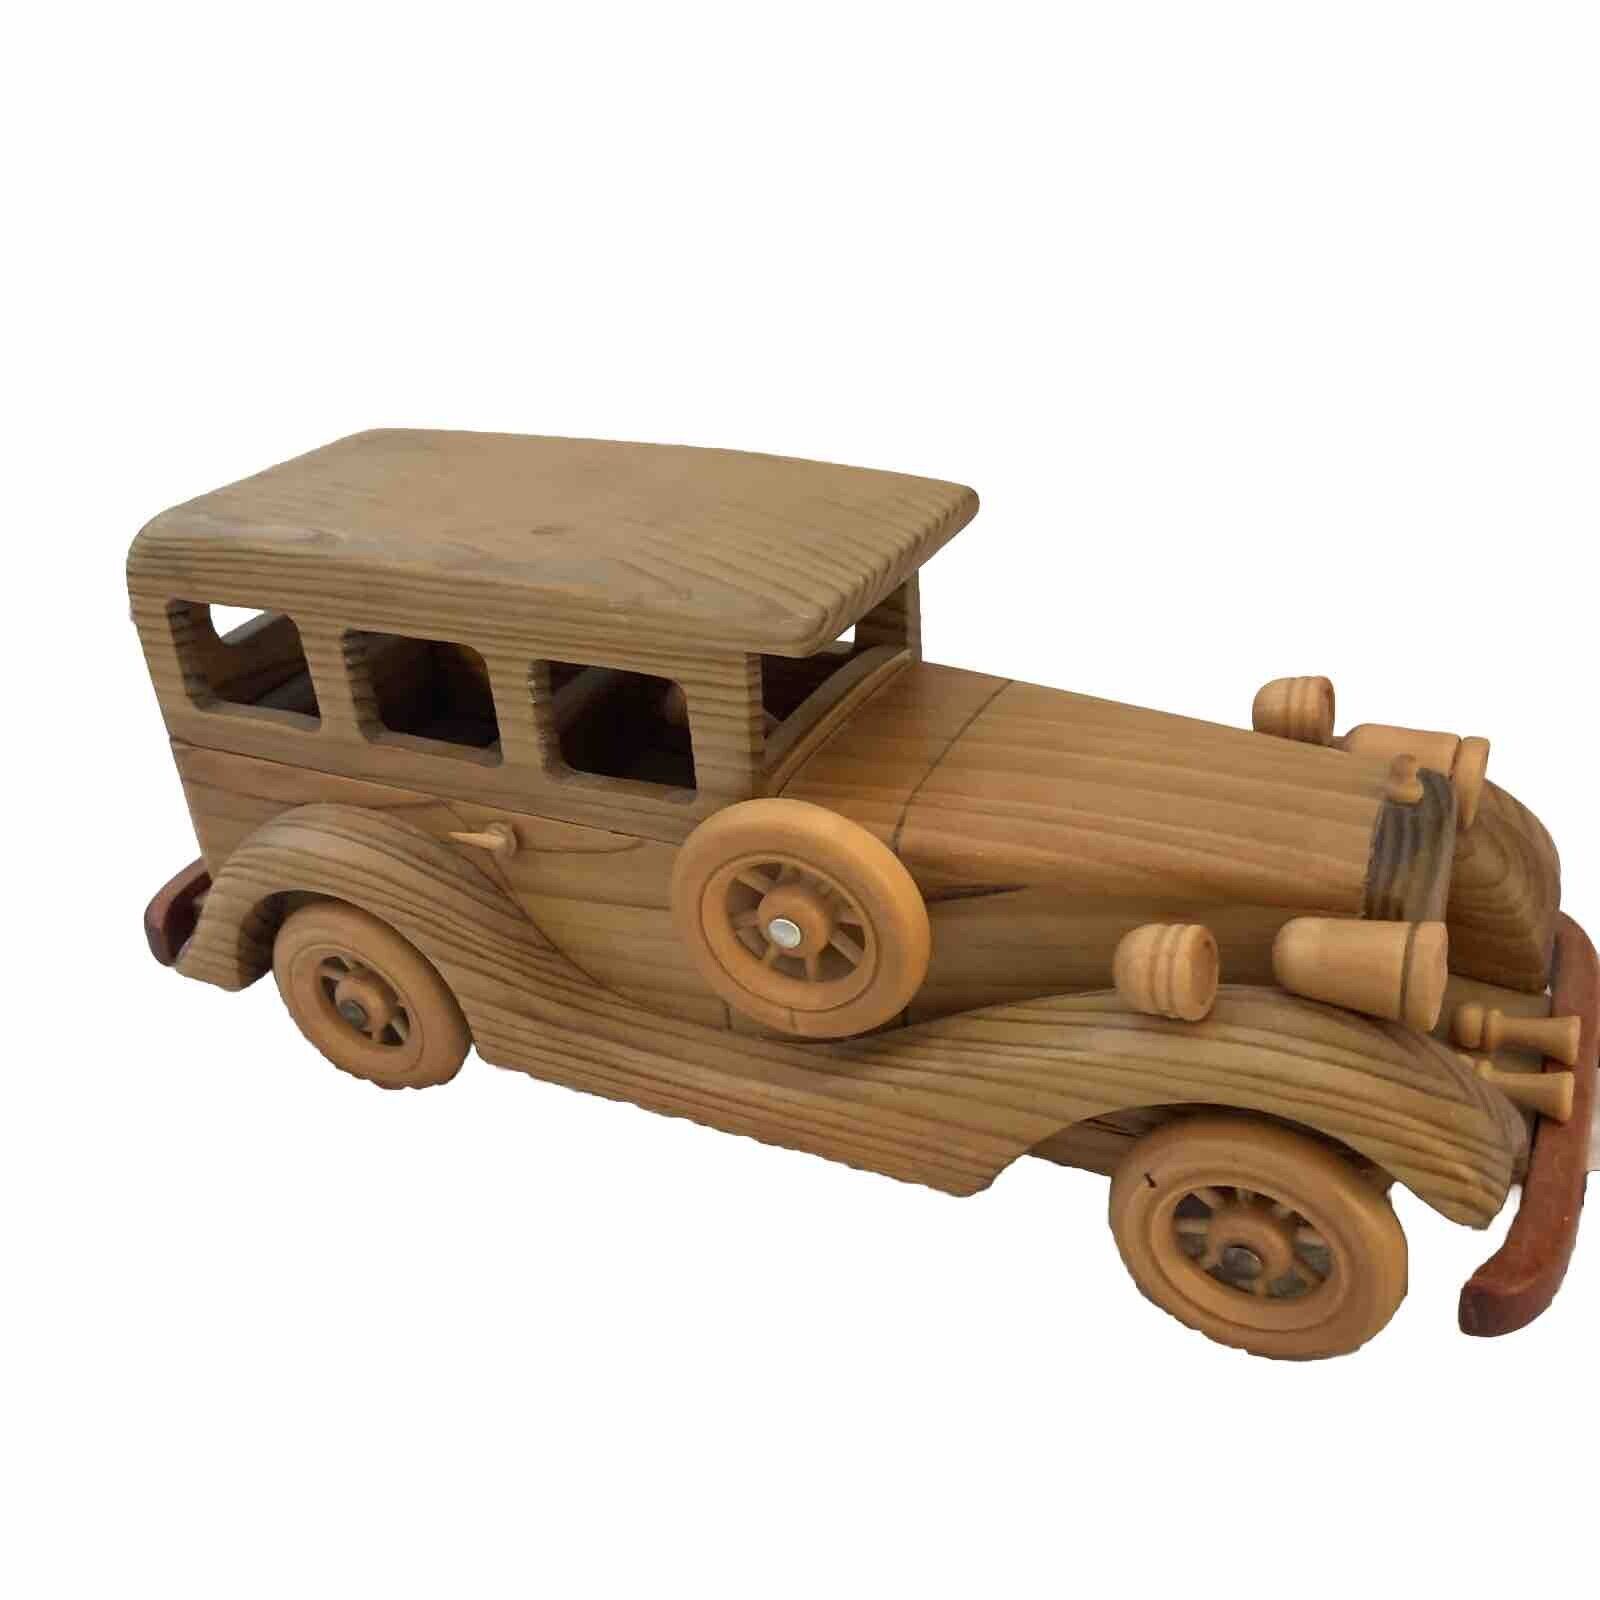 Wooden Station Wagon / Antique Style Toy Car 12” Long Perfect Condition